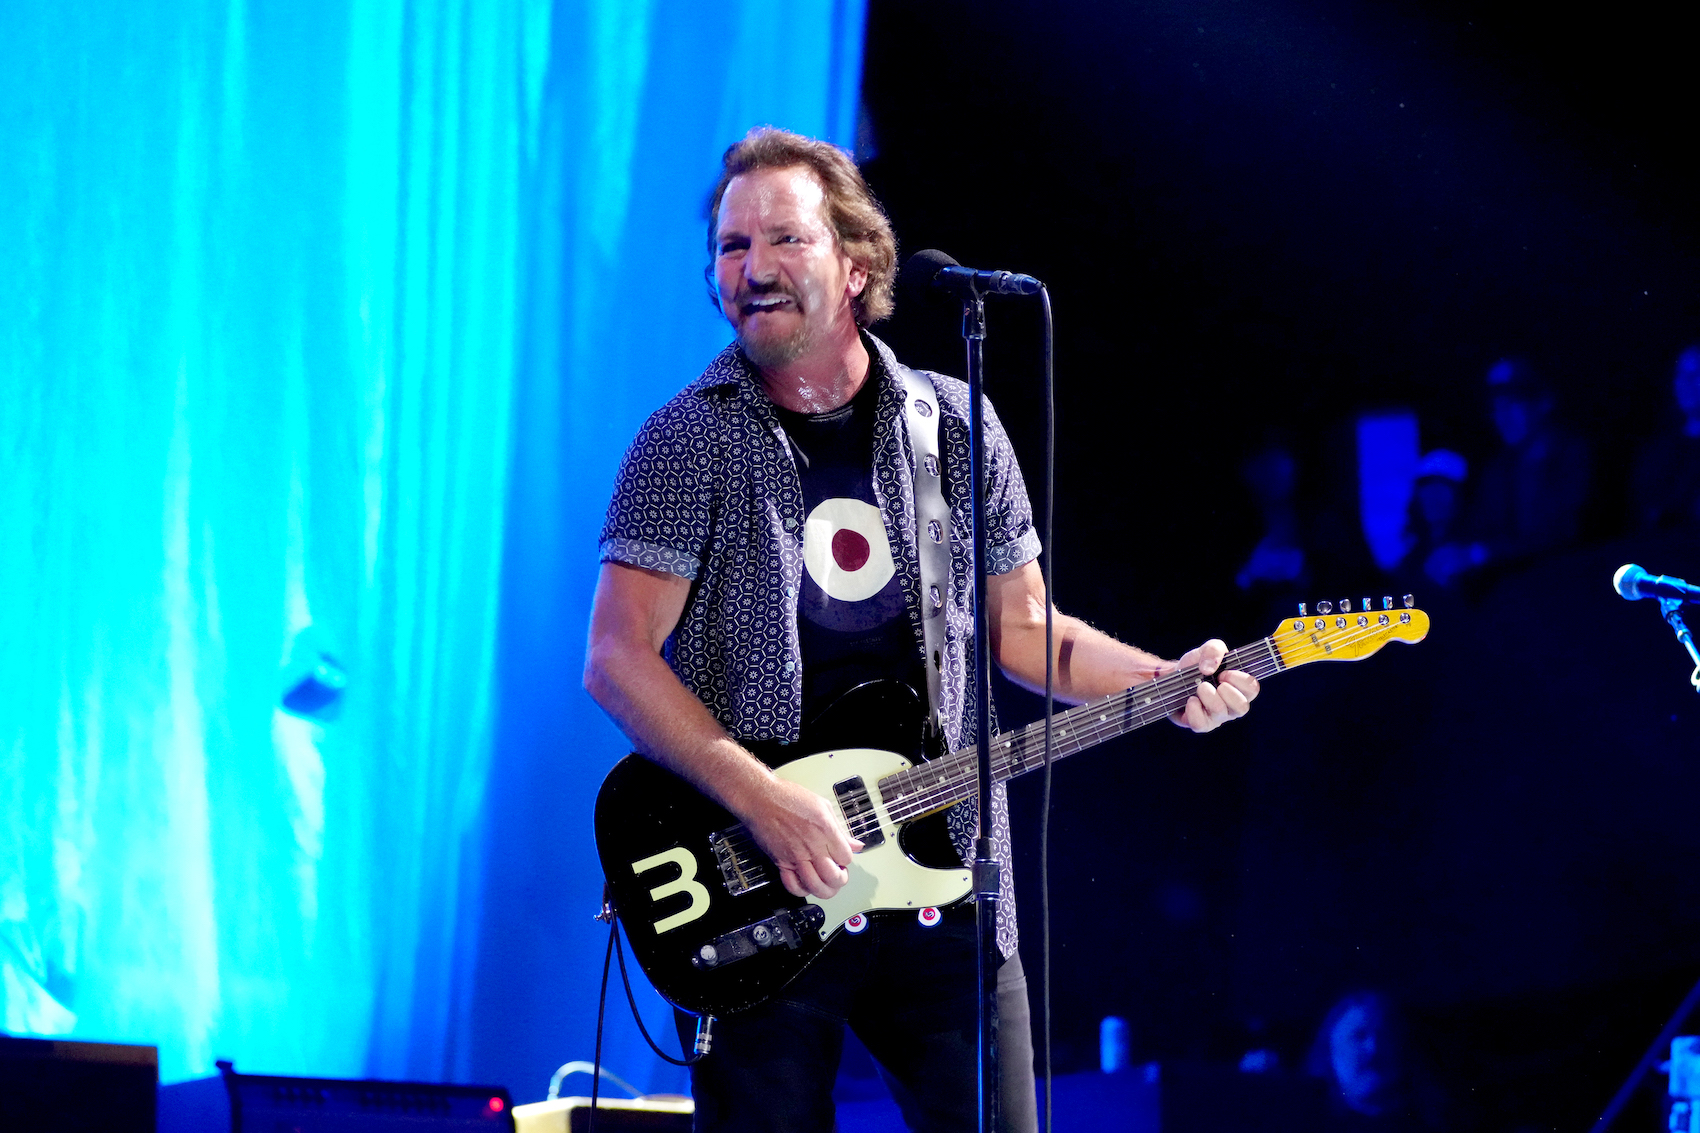 Eddie Vedder performs with Eddie Vedder and the Earthlings at the Ohana Music Festival in California